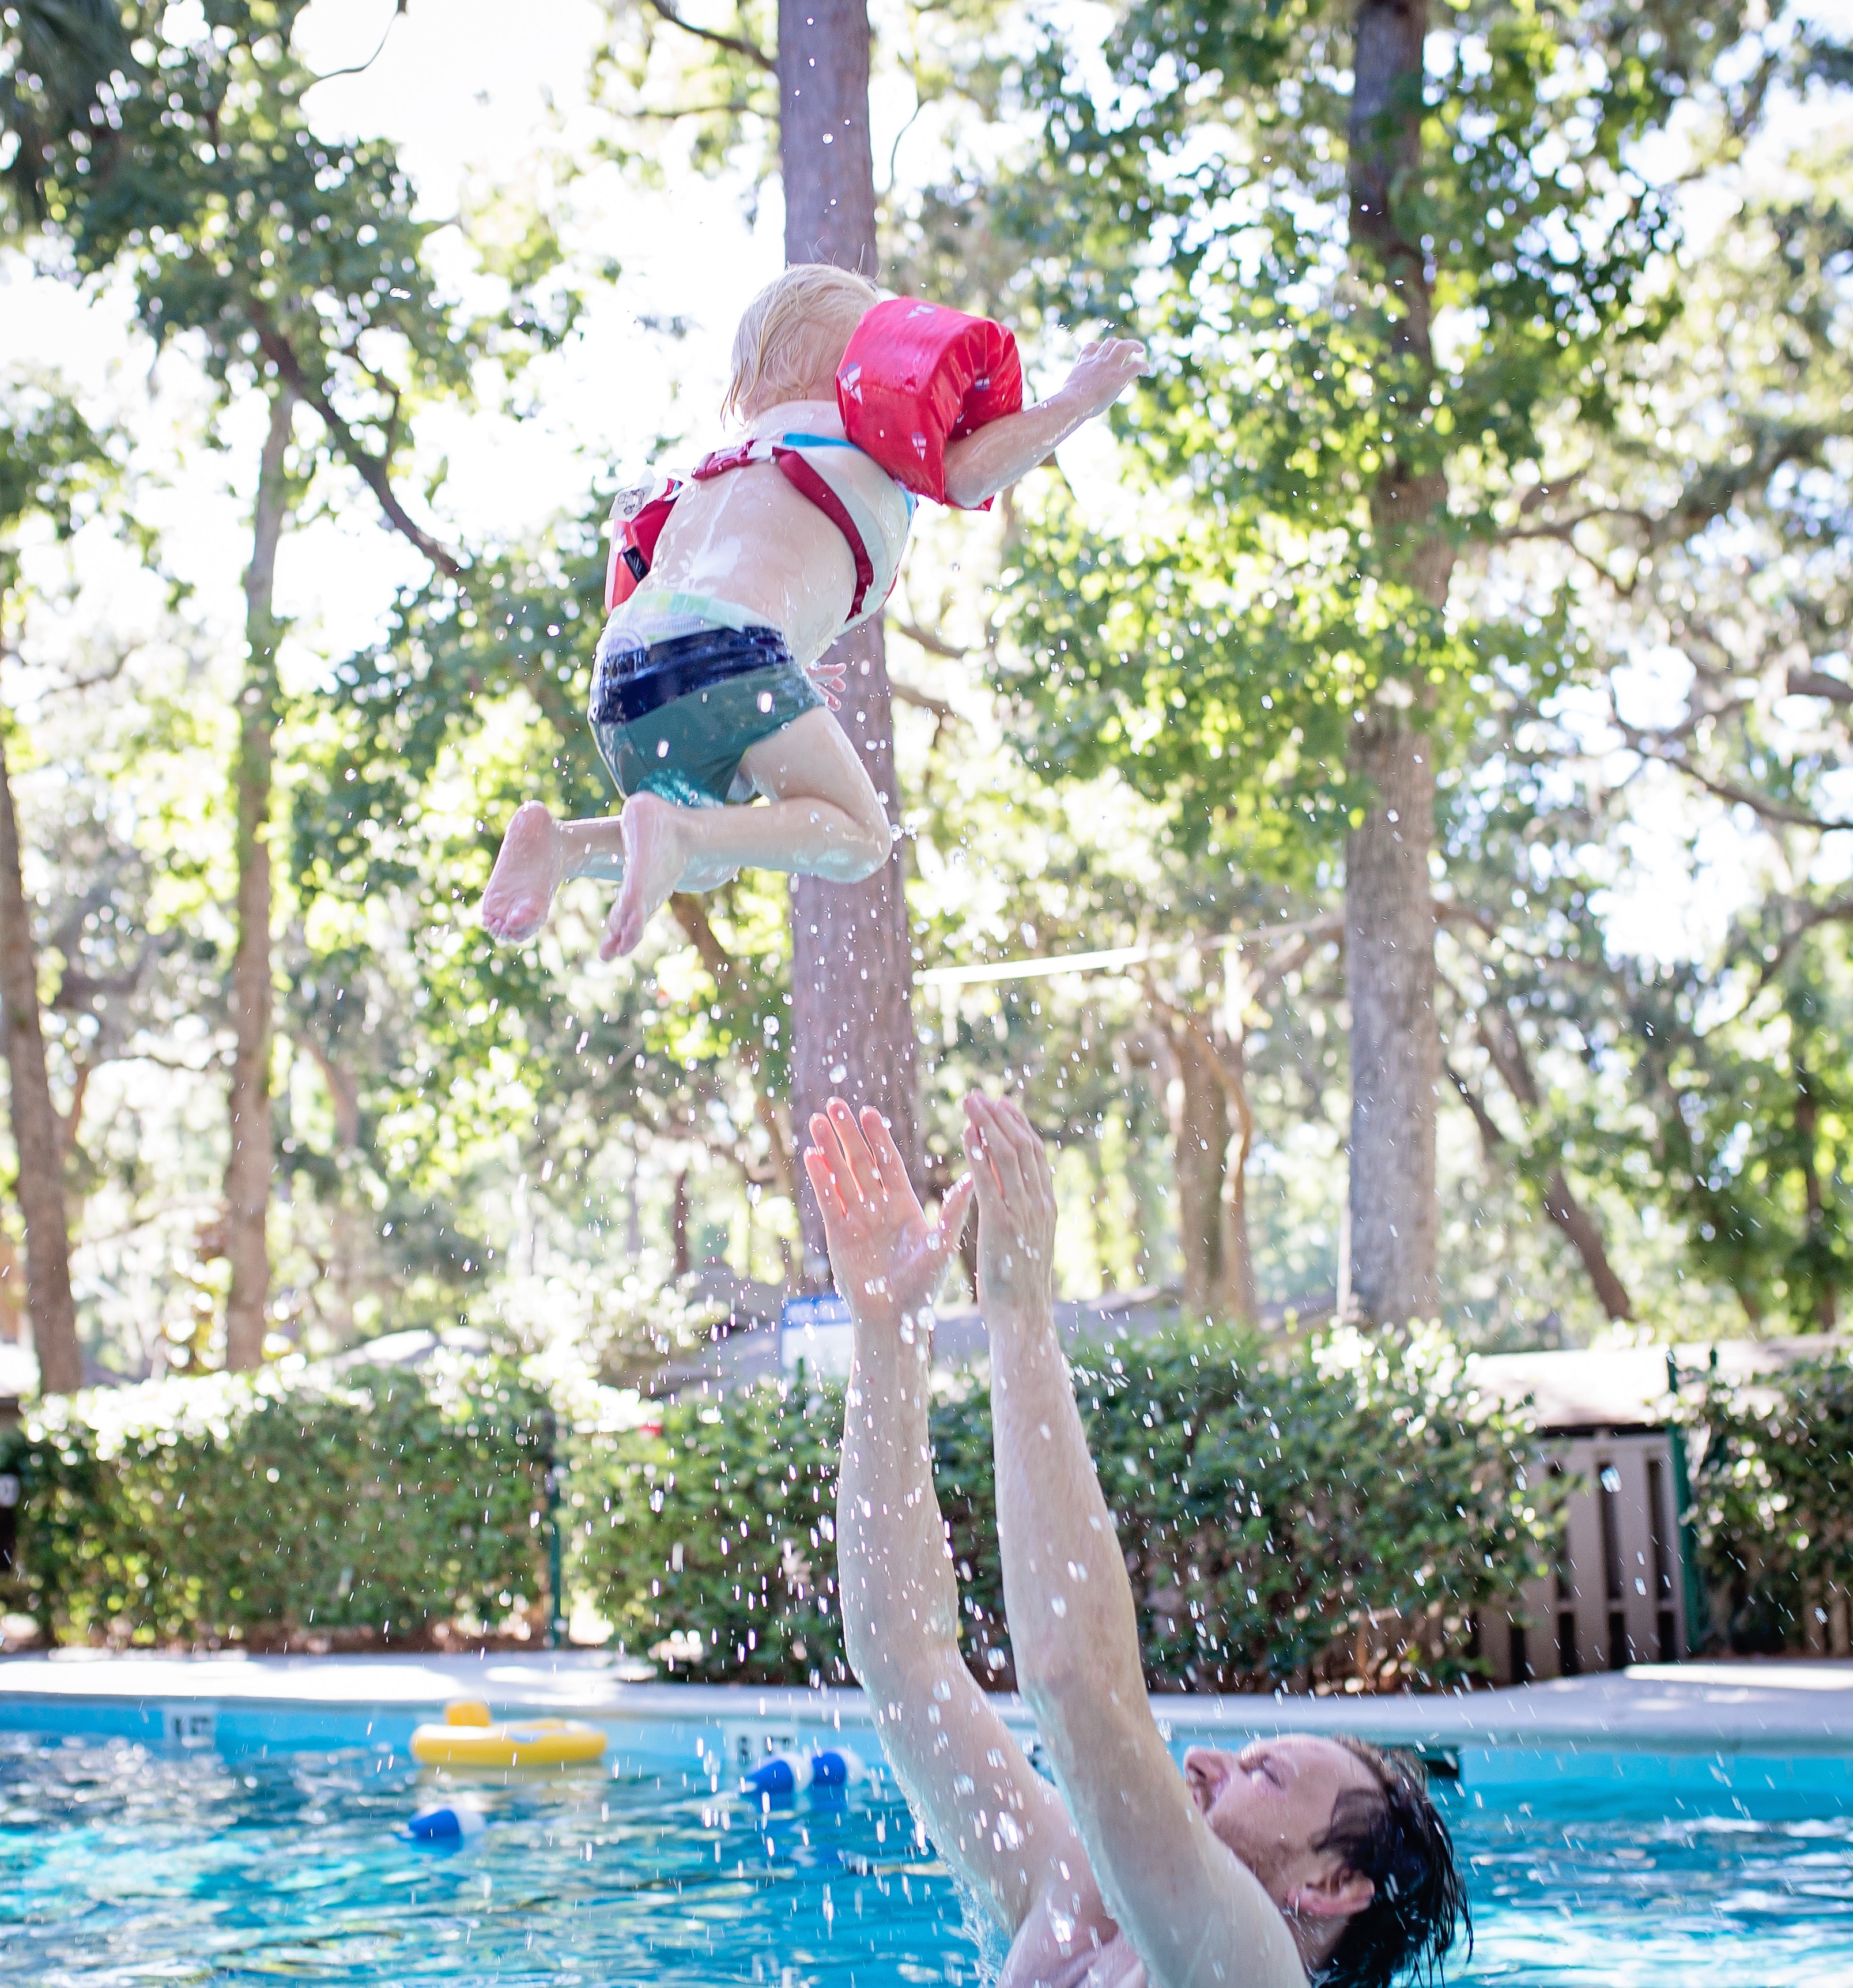 Photography of Man on Swimming Pool Tossing Toddler Above Pool, Active, Outdoors, Wet, Water, HQ Photo